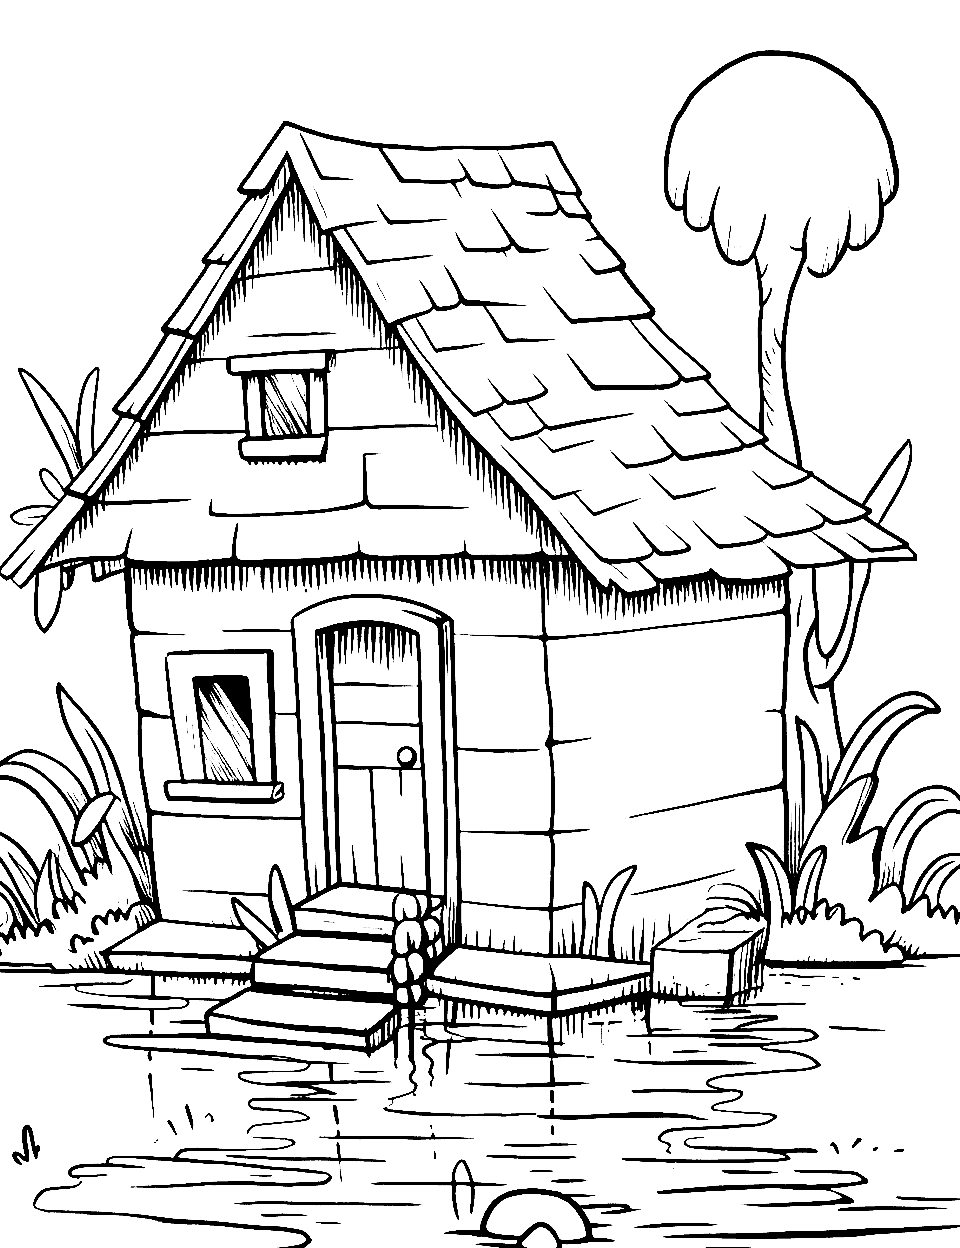 Eerie Swamp Shack Coloring Page - A shack in a swamp with an eerie-looking environment.